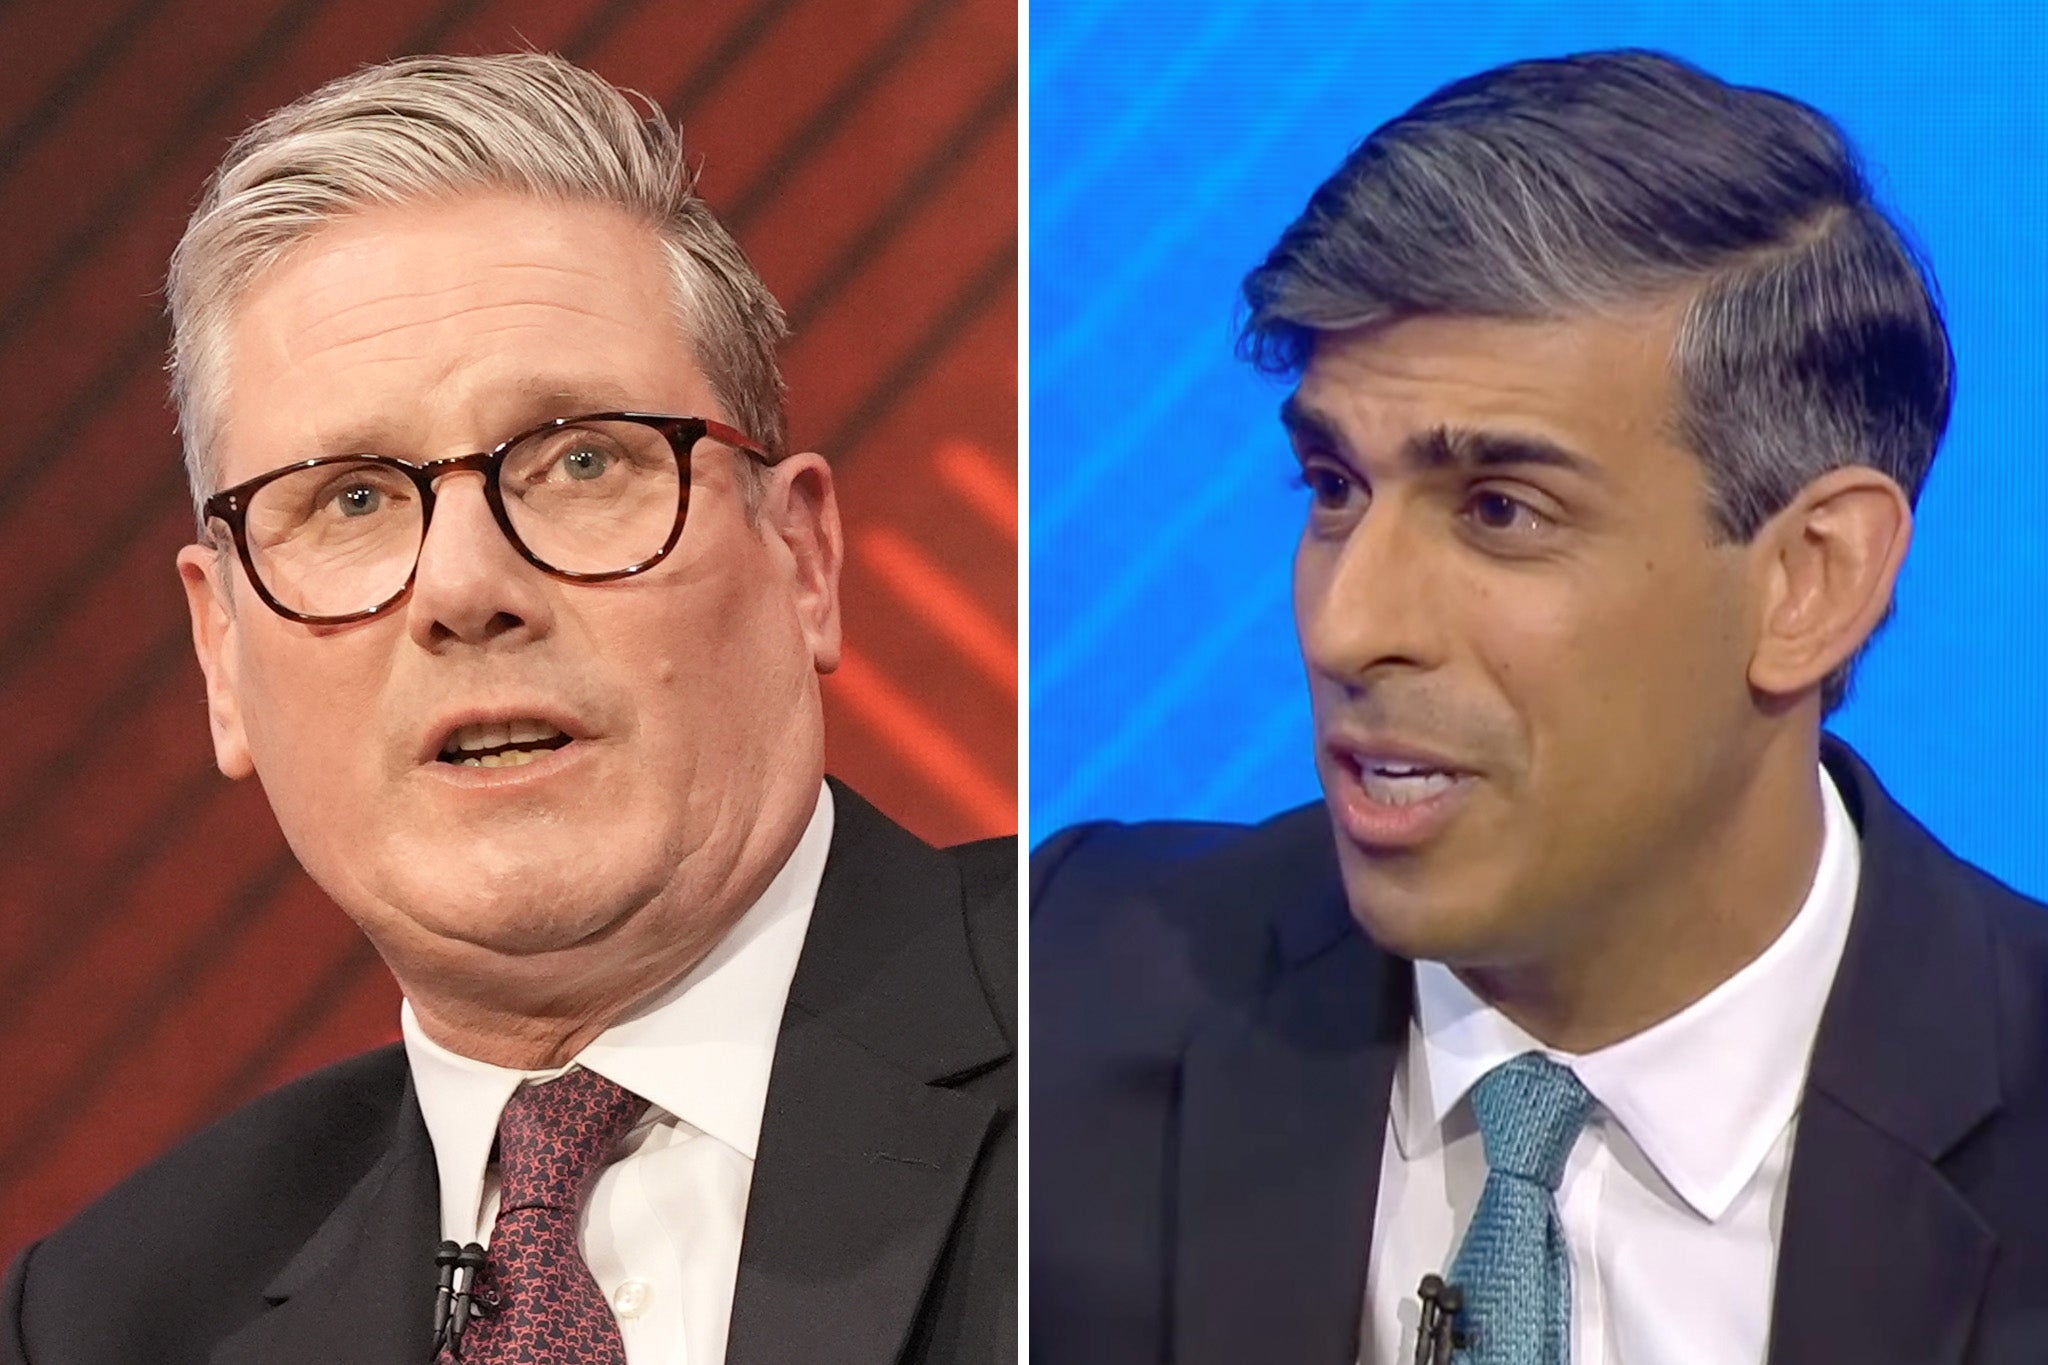 Independent readers are split after a second general election TV clash between Keir Starmer and Rishi Sunak